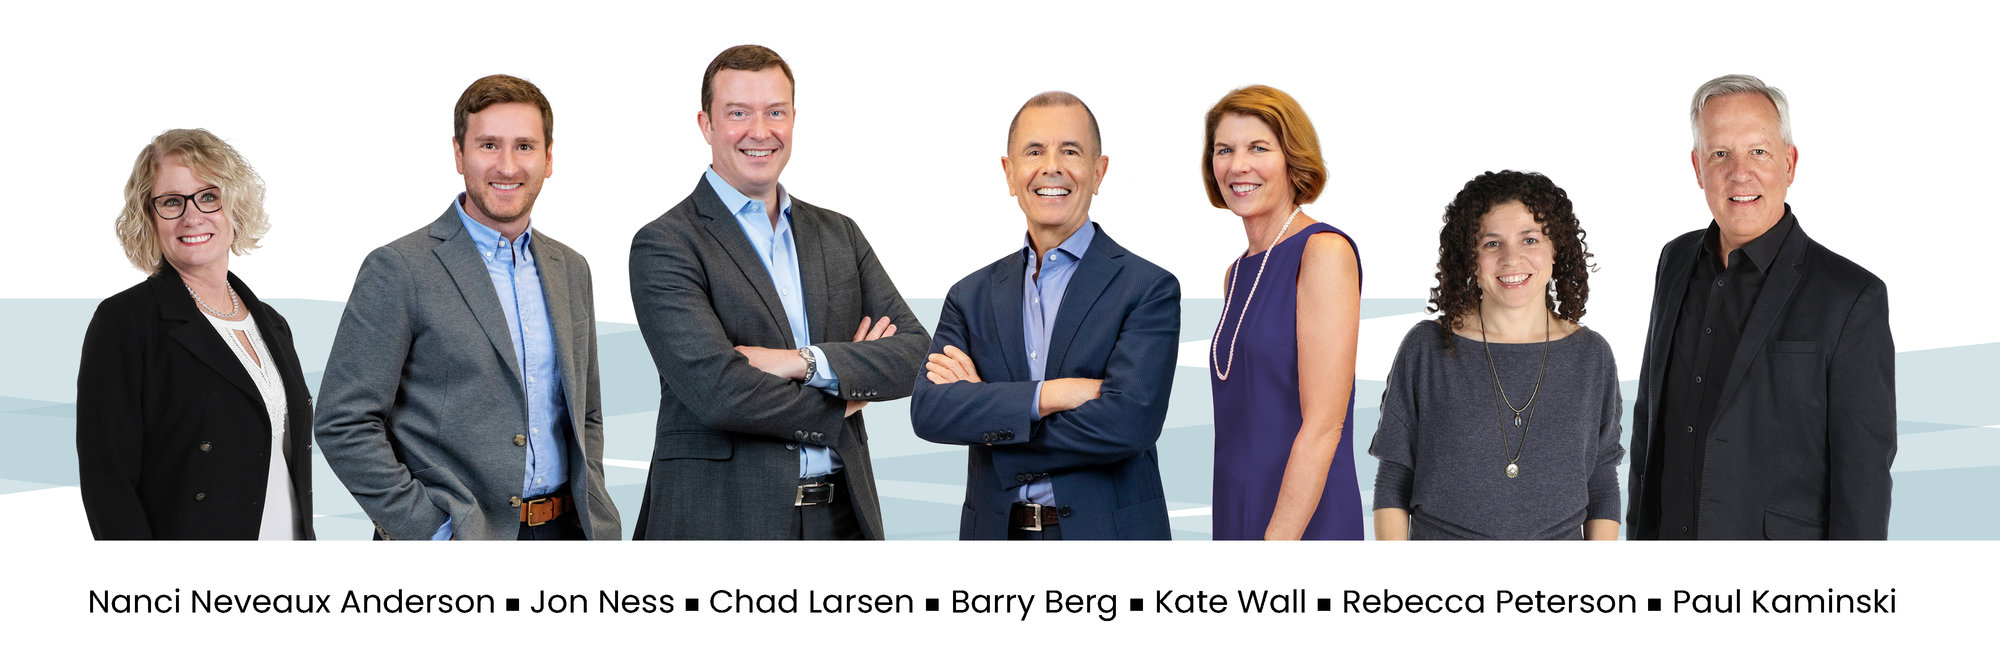 The Berg Larsen Group of professional realtors, on a white background. From left to Right: Nanci Anderson, Jon Ness, Chad Larsen, Barry Berg, Kate Wall, Rebecca Peterson, and Paul Kaminski.